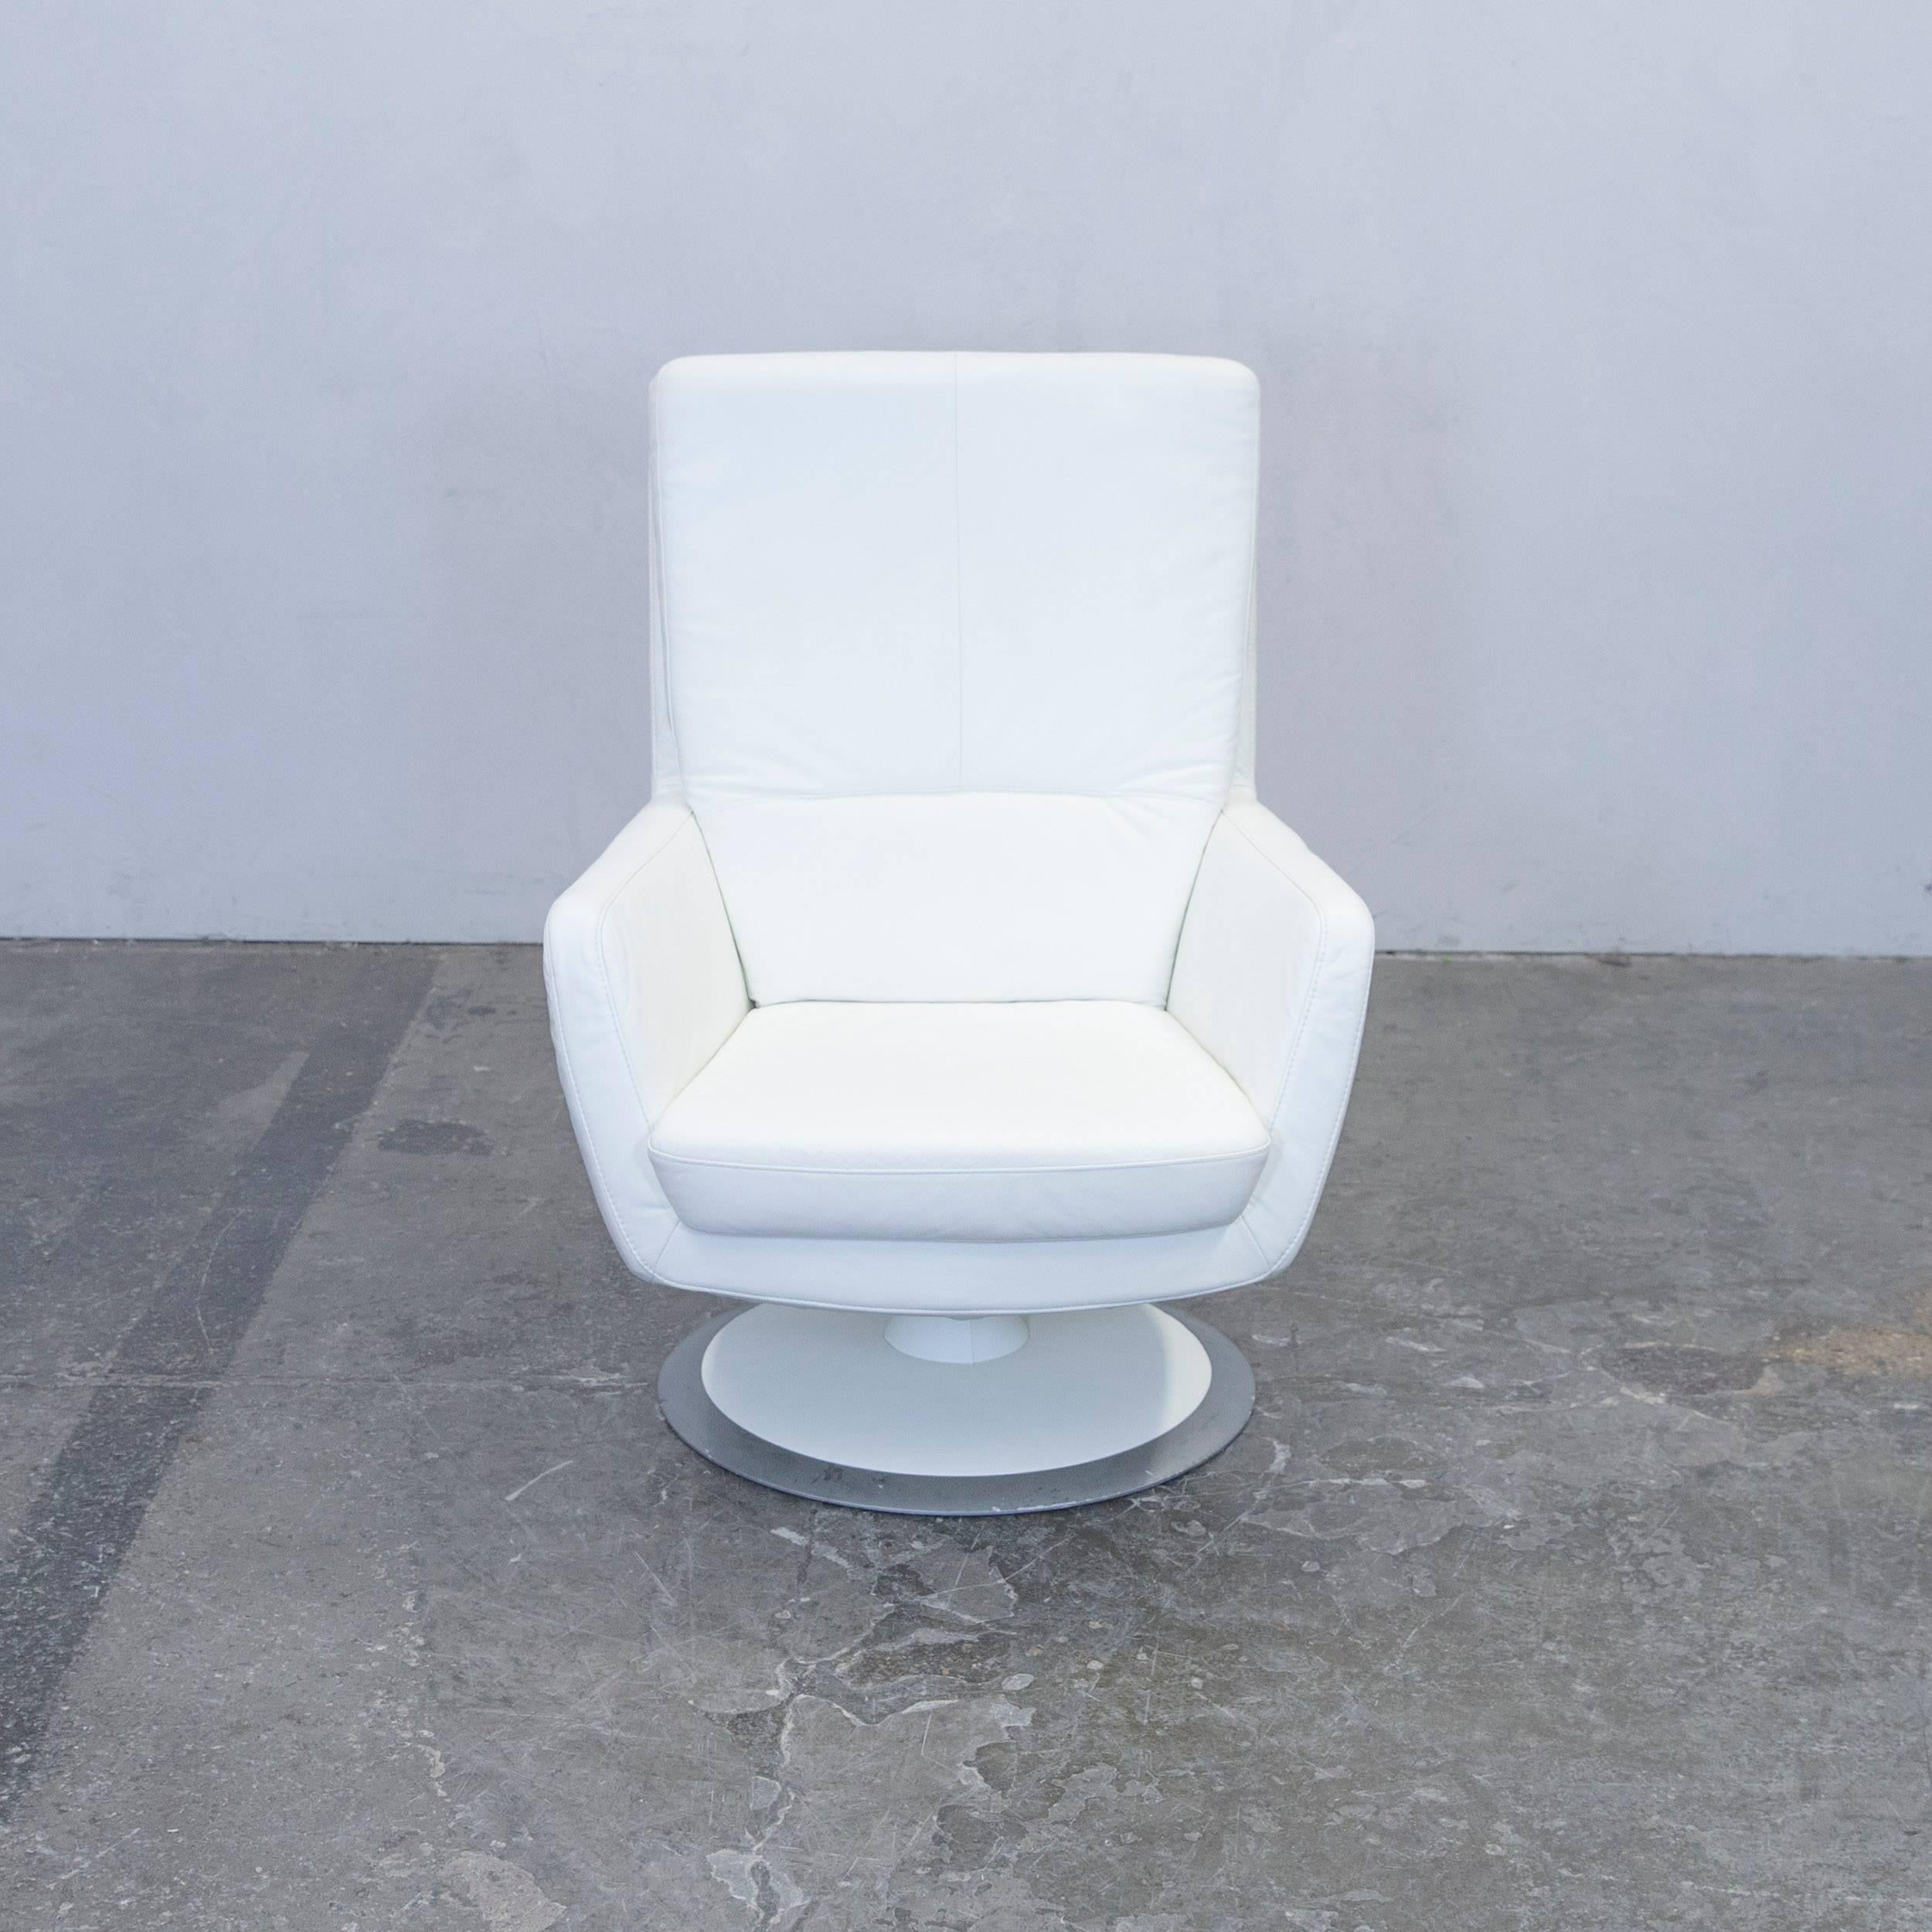 White colored Musterring designer leather armchair, in a minimalistic and modern design, made for pure comfort.